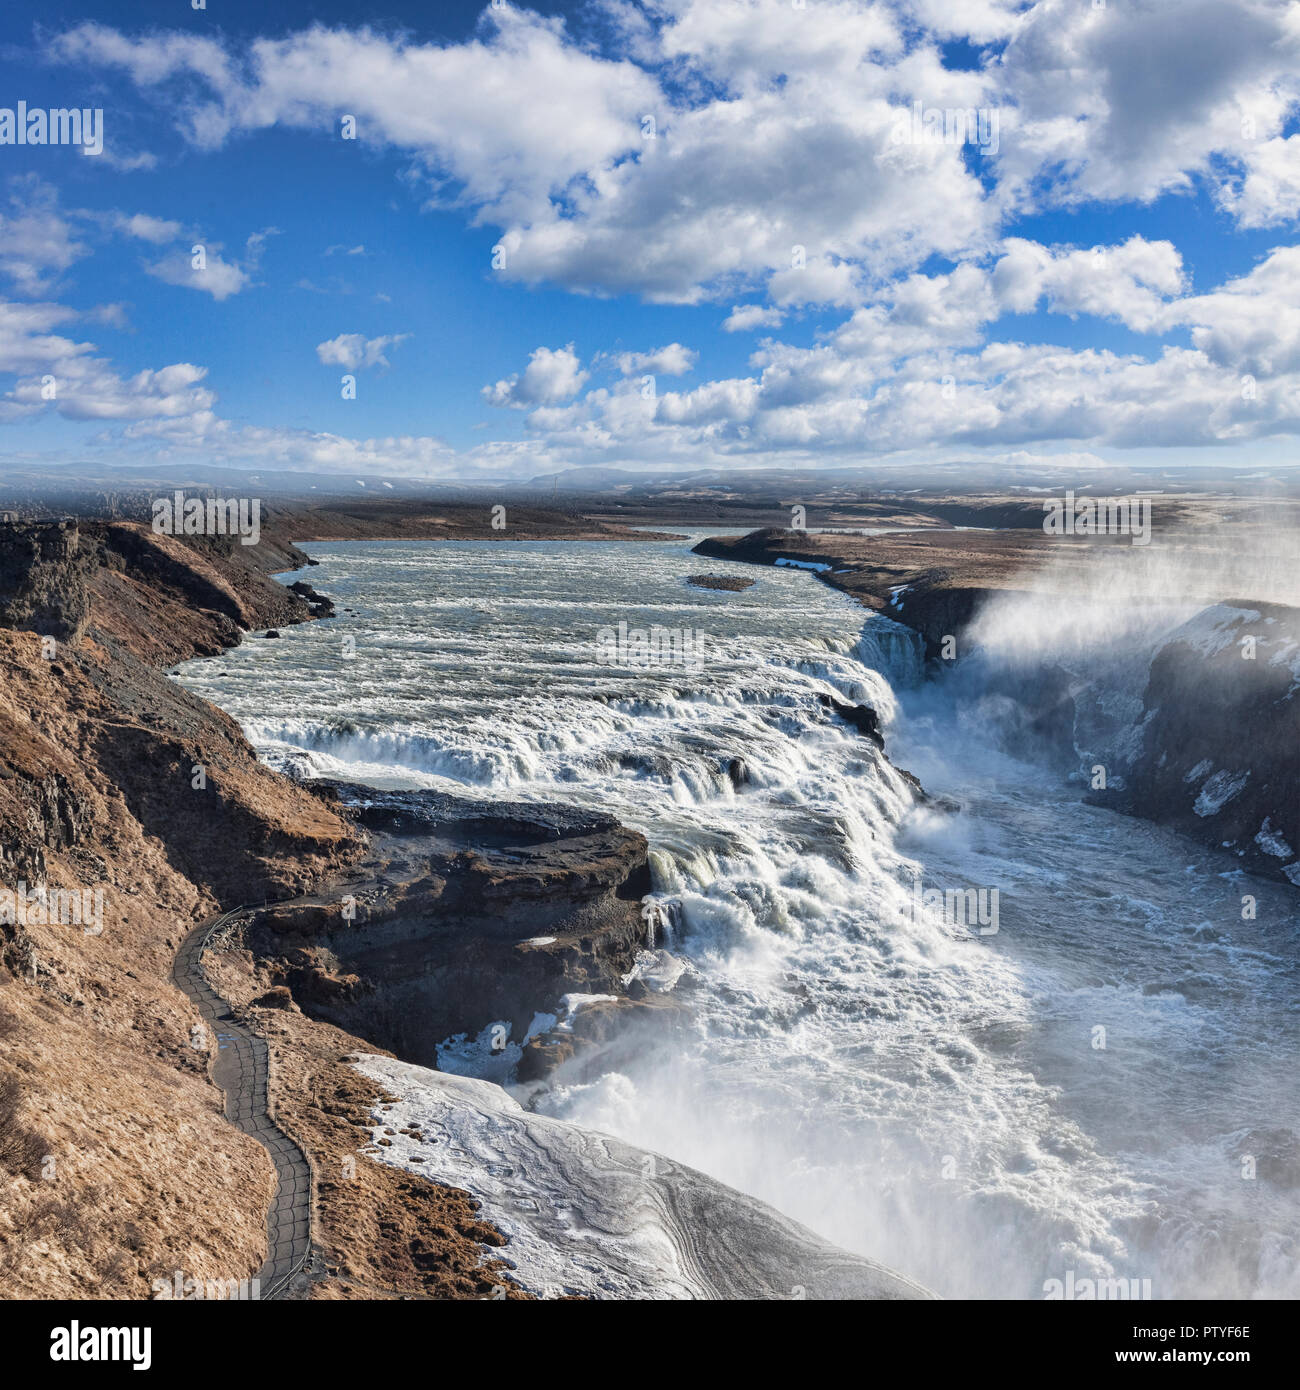 Iceland's most famous waterfall, Gullfoss, in spring, from a high viewpoint. Stock Photo